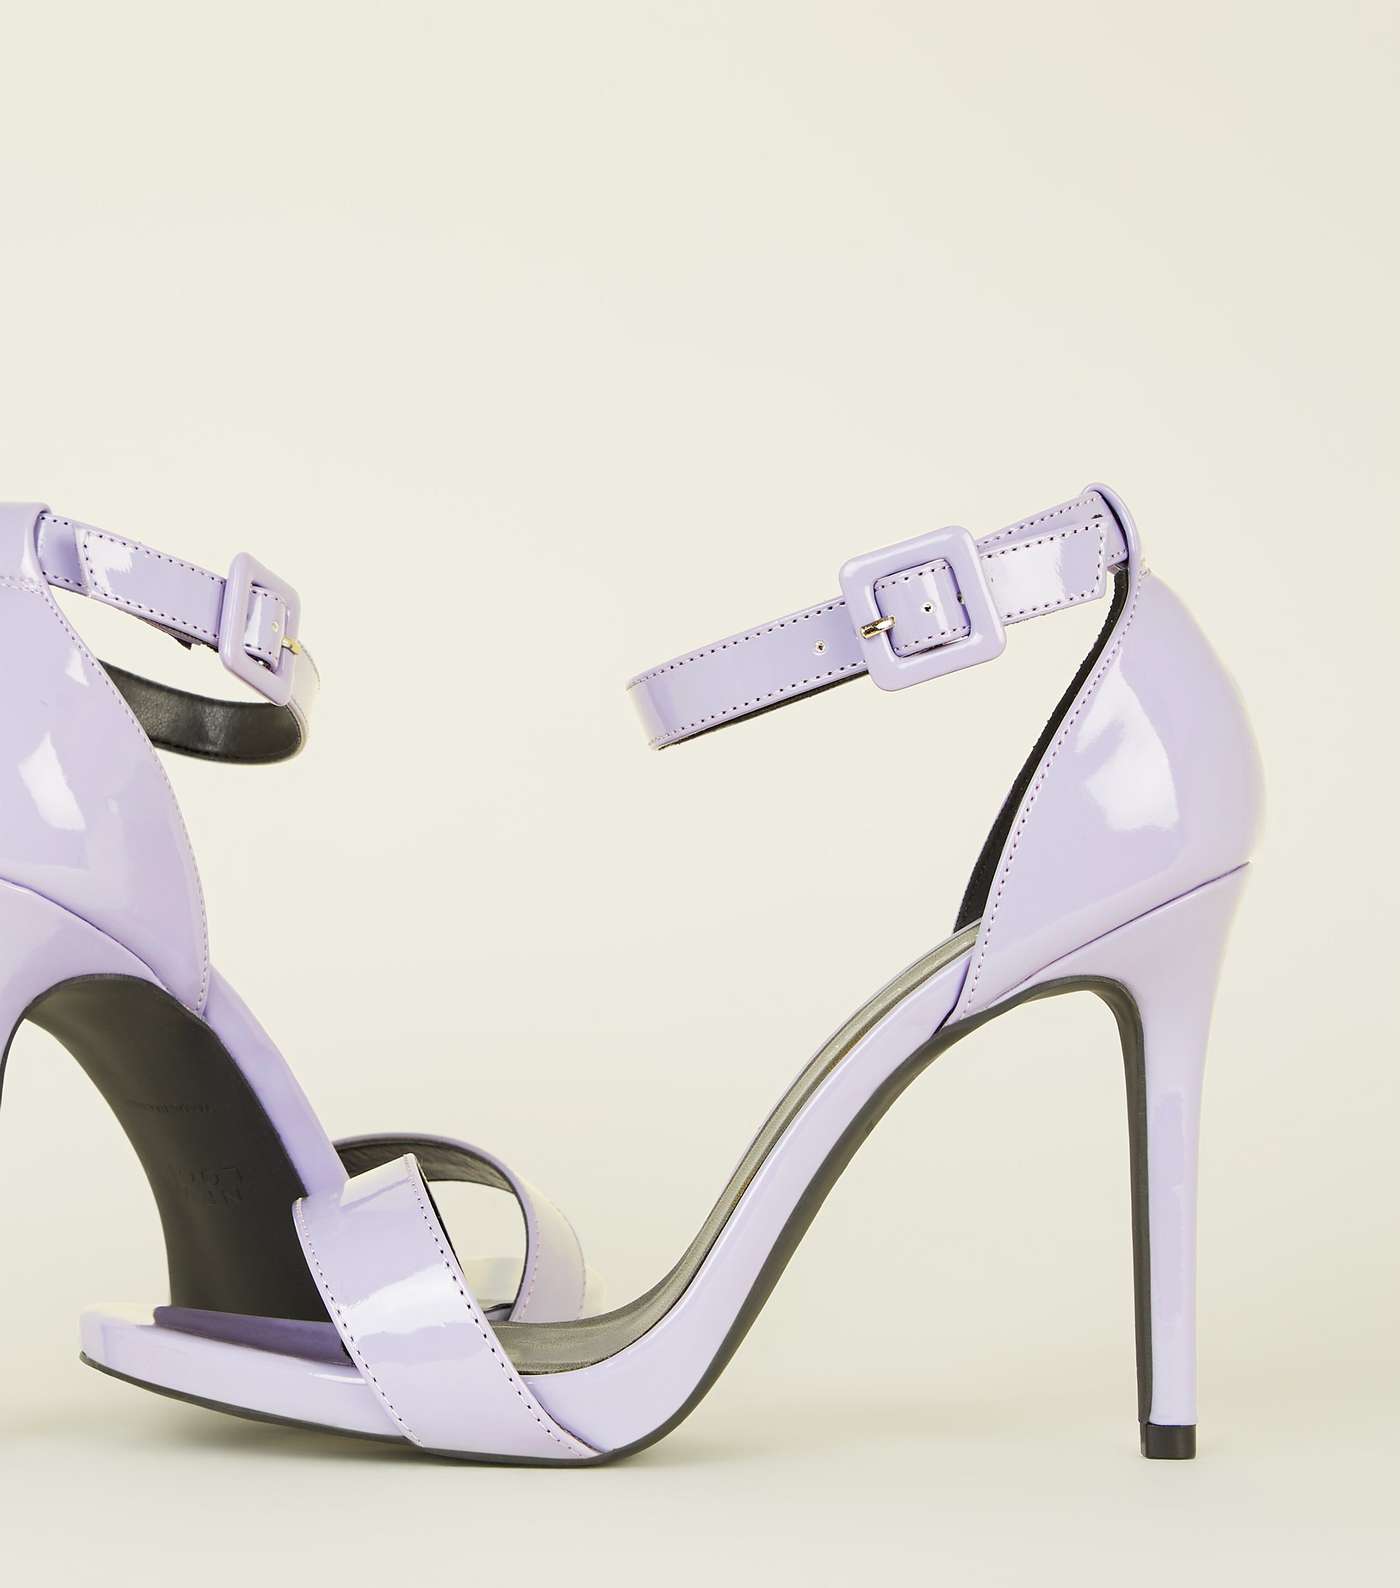 Wide Fit Lilac Patent Stiletto Heels Image 4